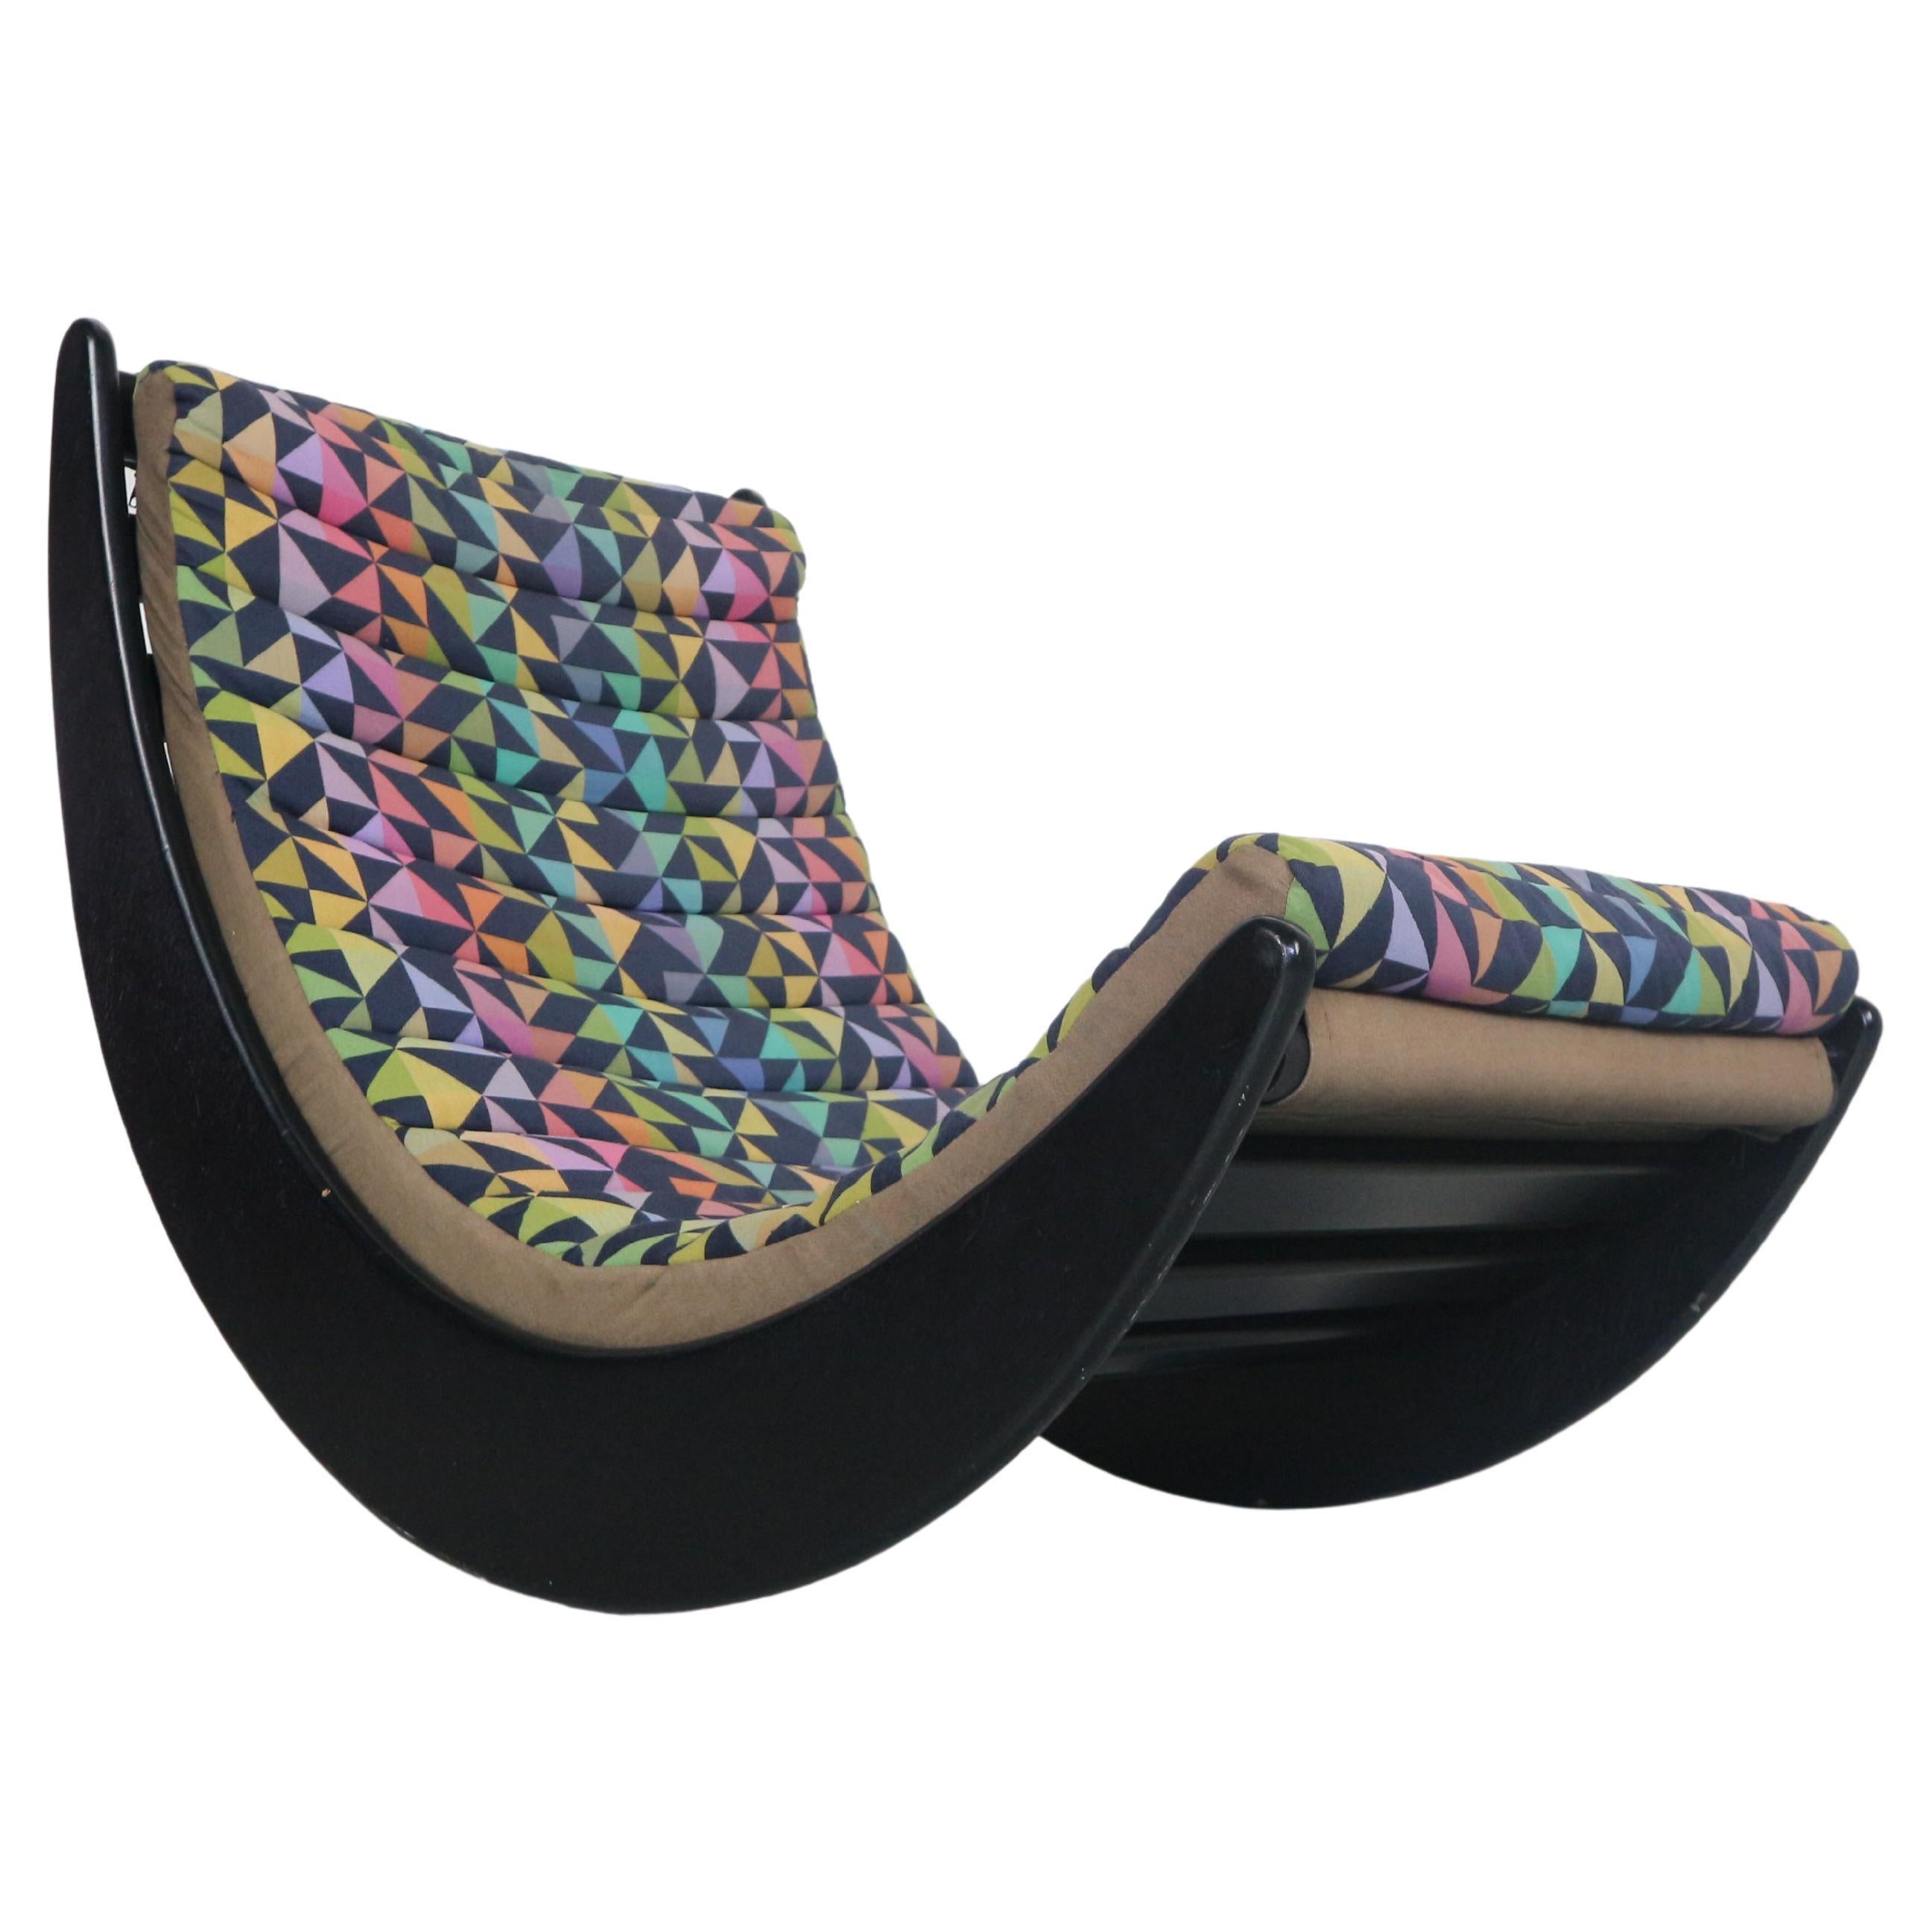 Verner Panton Original "Relaxer 2" Rocking Chair by Rosenthal, 1970s For Sale